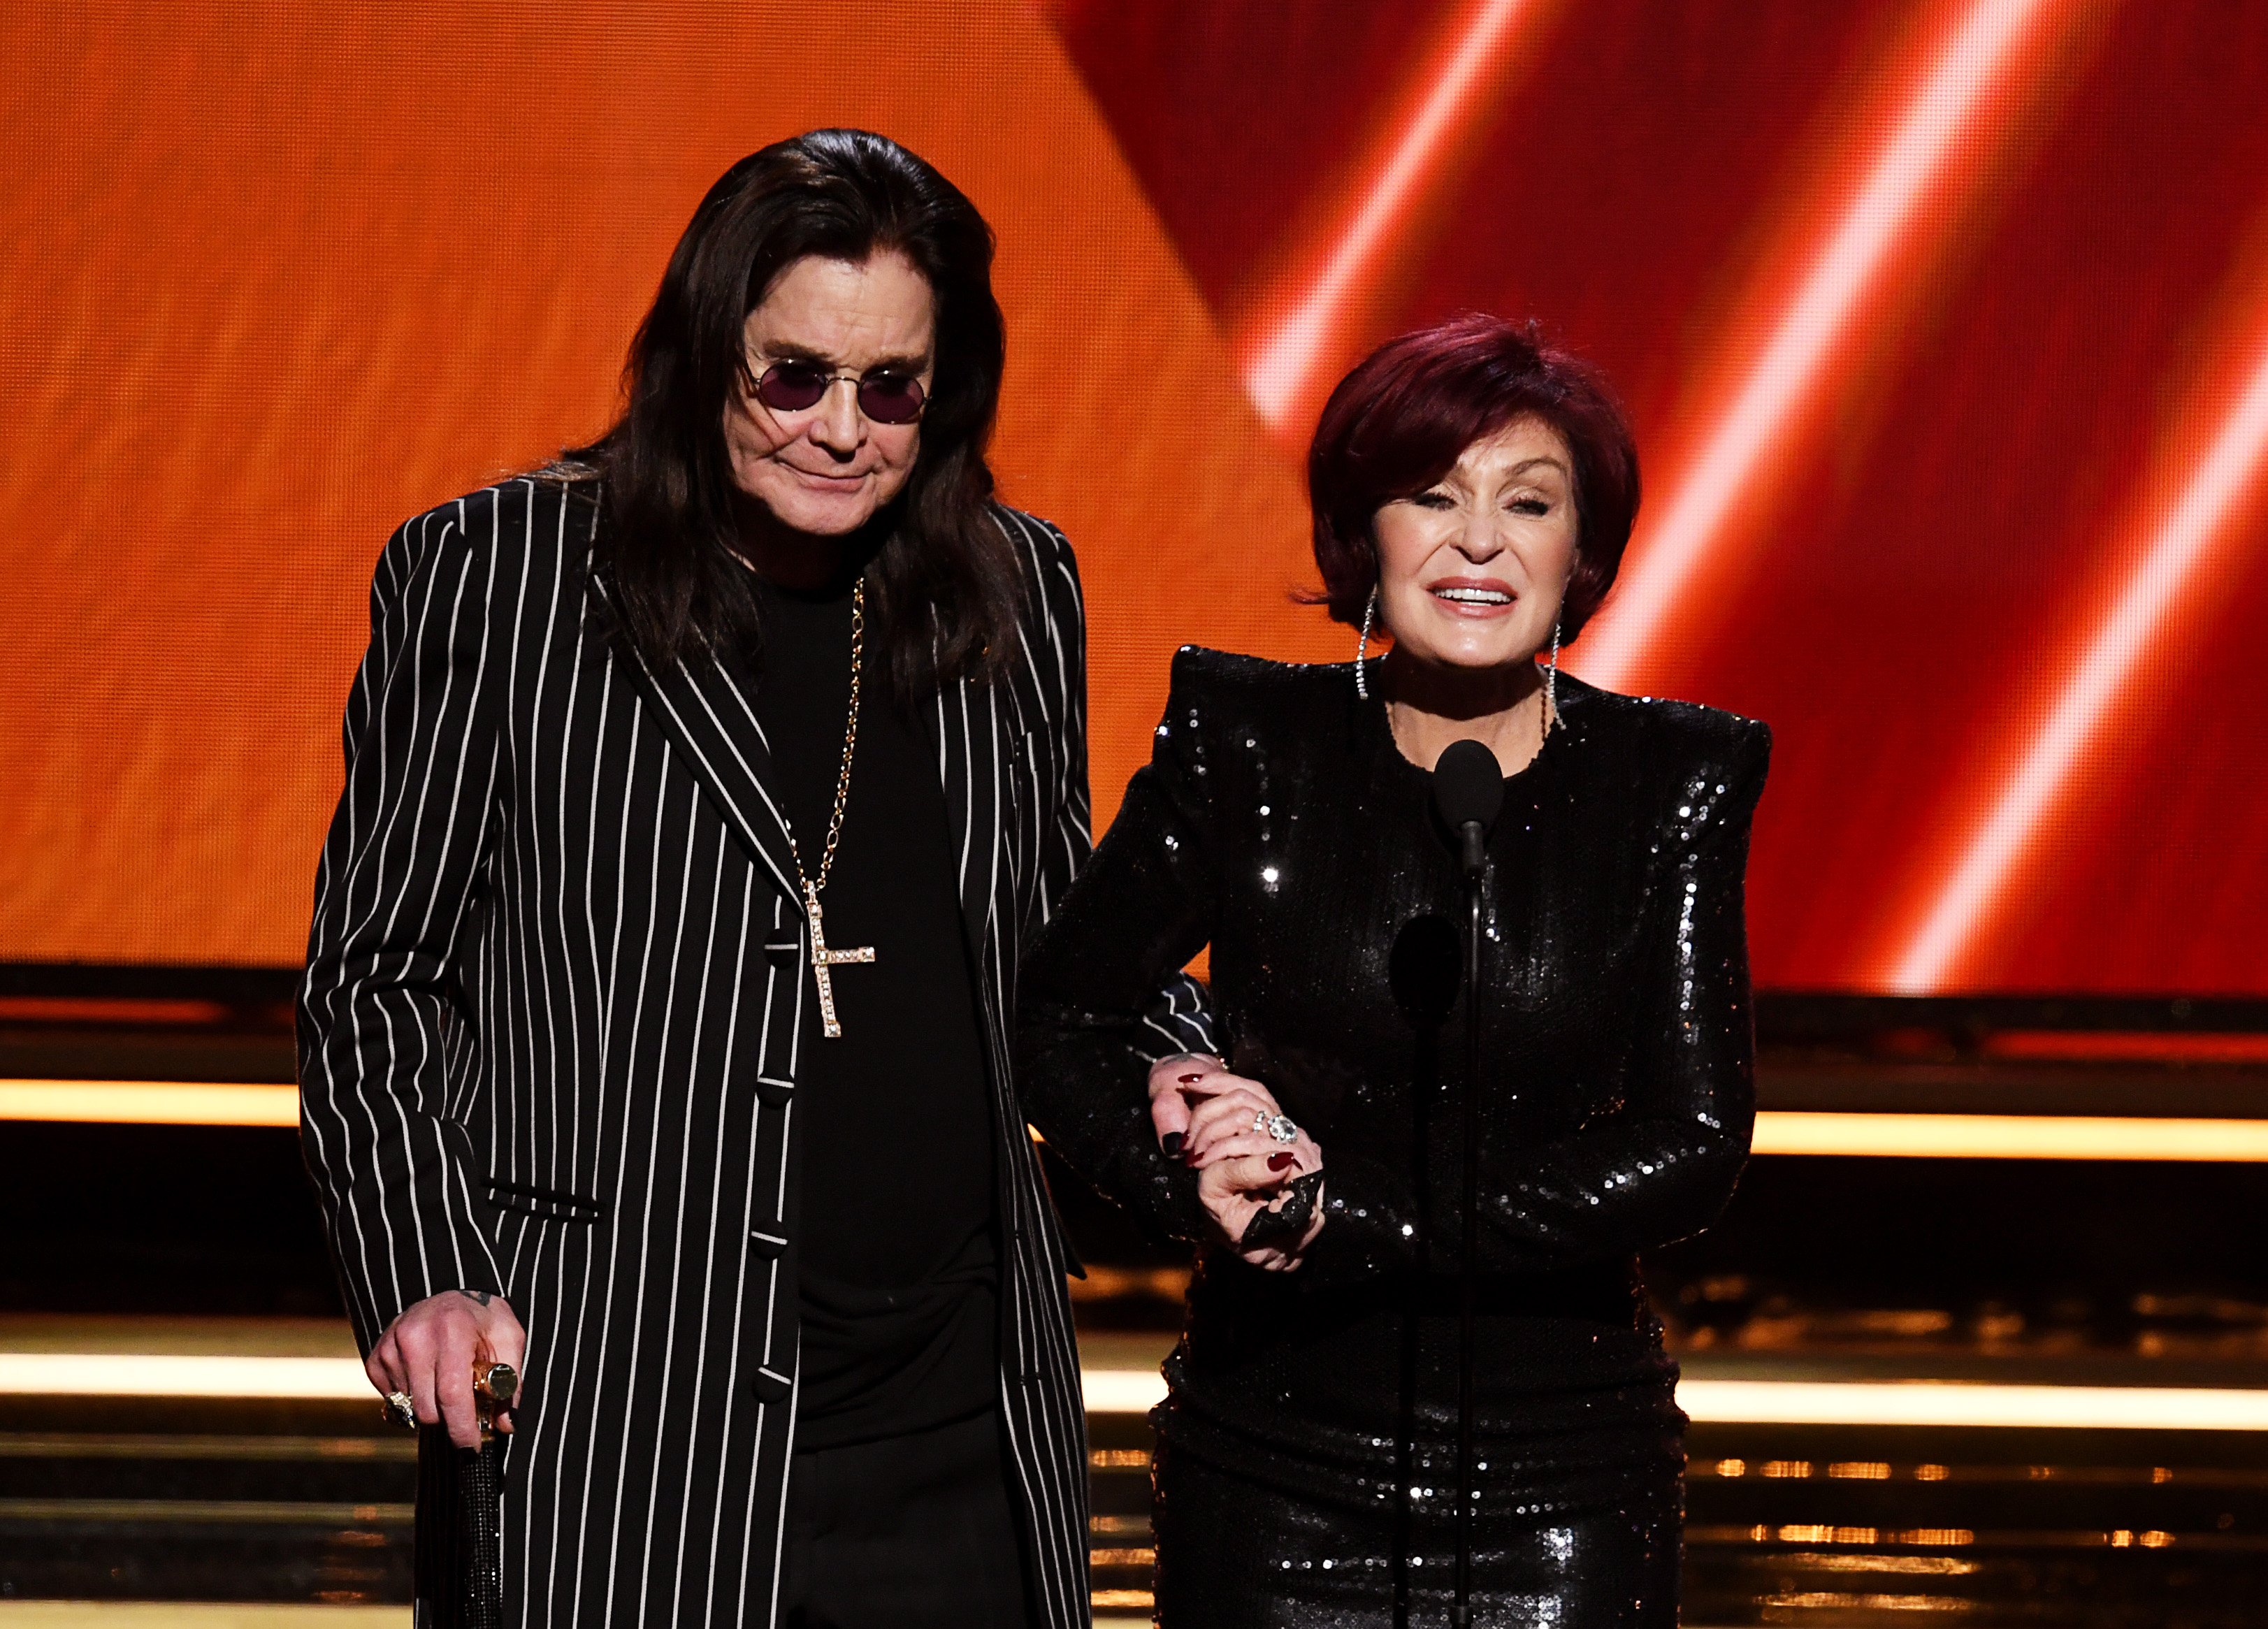 Ozzyand Sharon Osbourne at the 62nd Annual Grammy Awardson January 26, 2020, in Los Angeles, California | Source: Getty Images